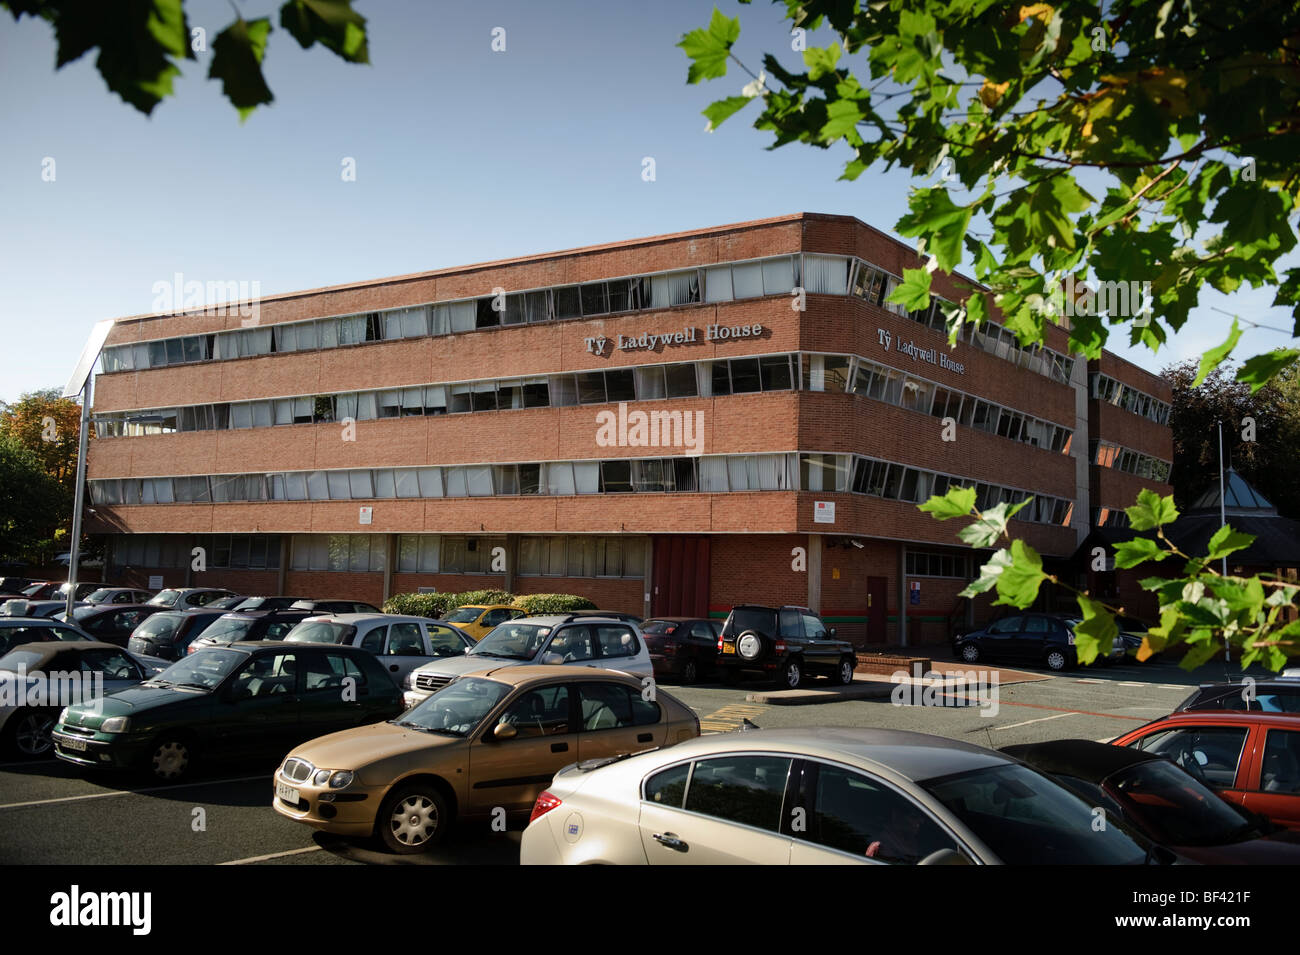 Ladywell House 1970's built office block in Newtown , Powys, Mid Wales UK Stock Photo